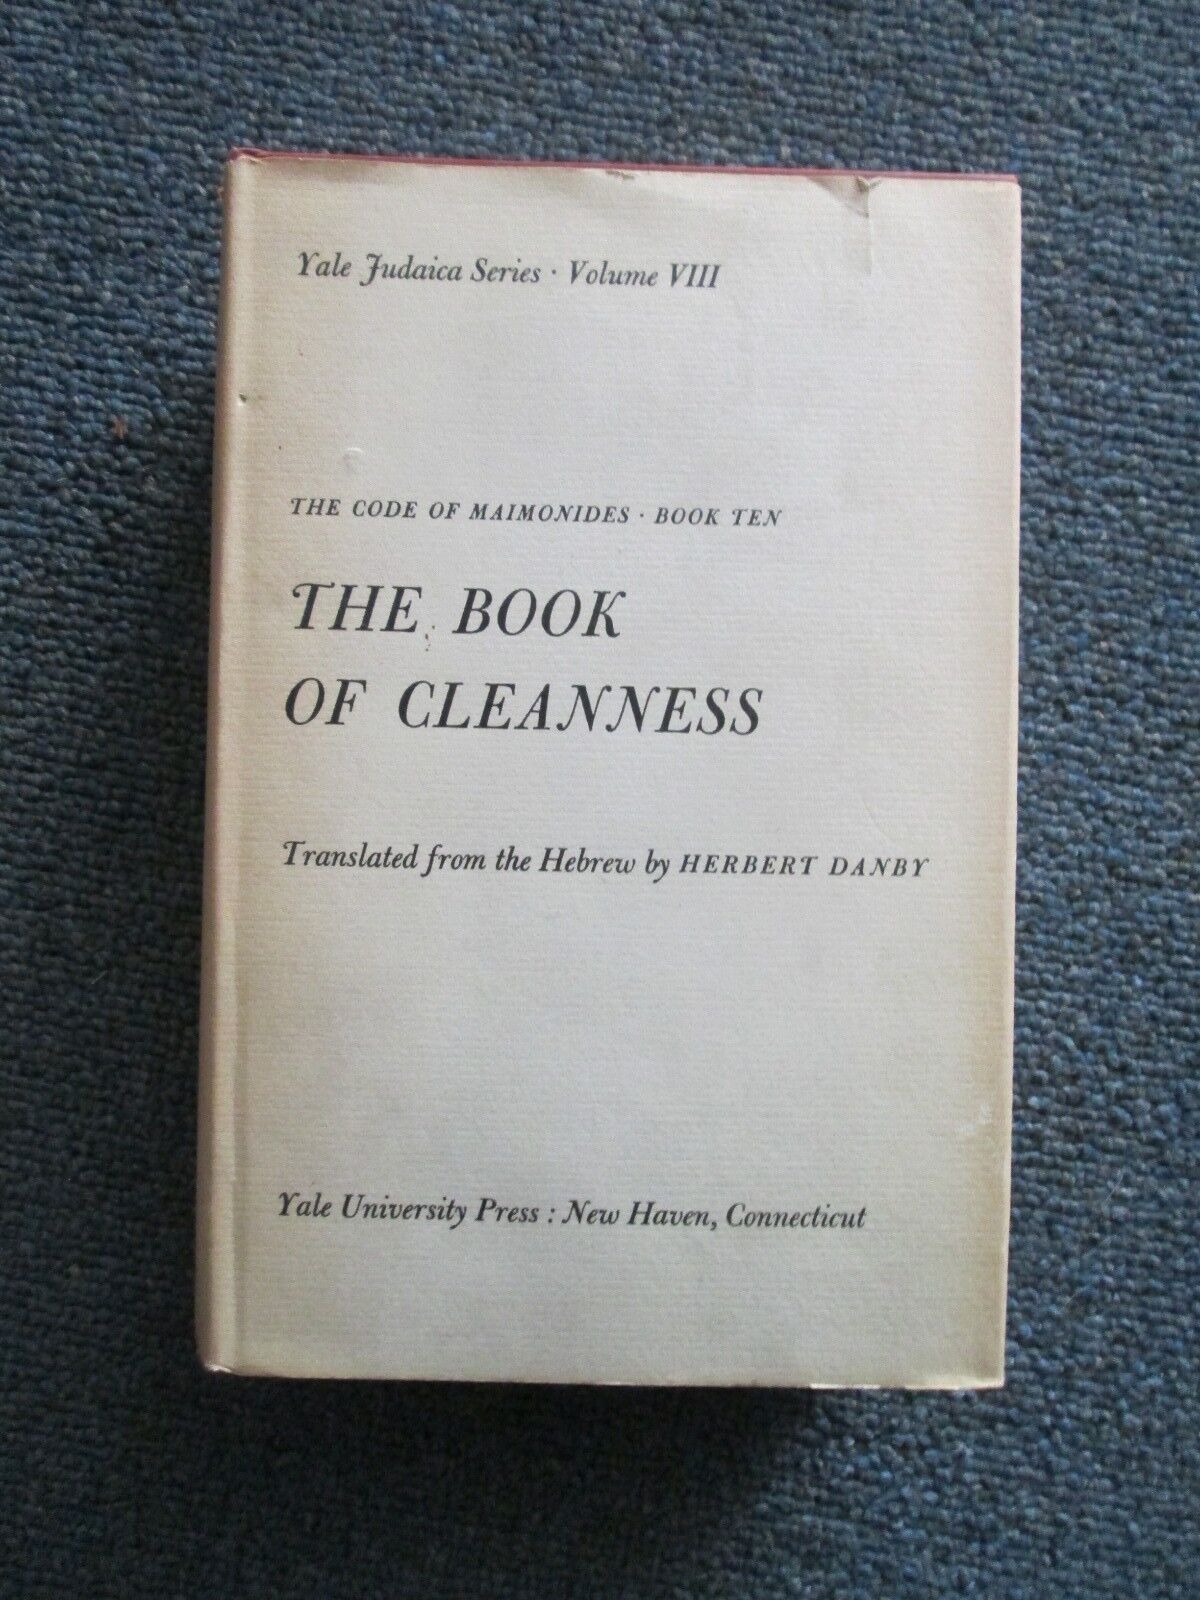 YALE JUDAICA SERIES vol. VIII, THE BOOK OF CLEANNESS TRANS.BY HERBERT DANBY 1957